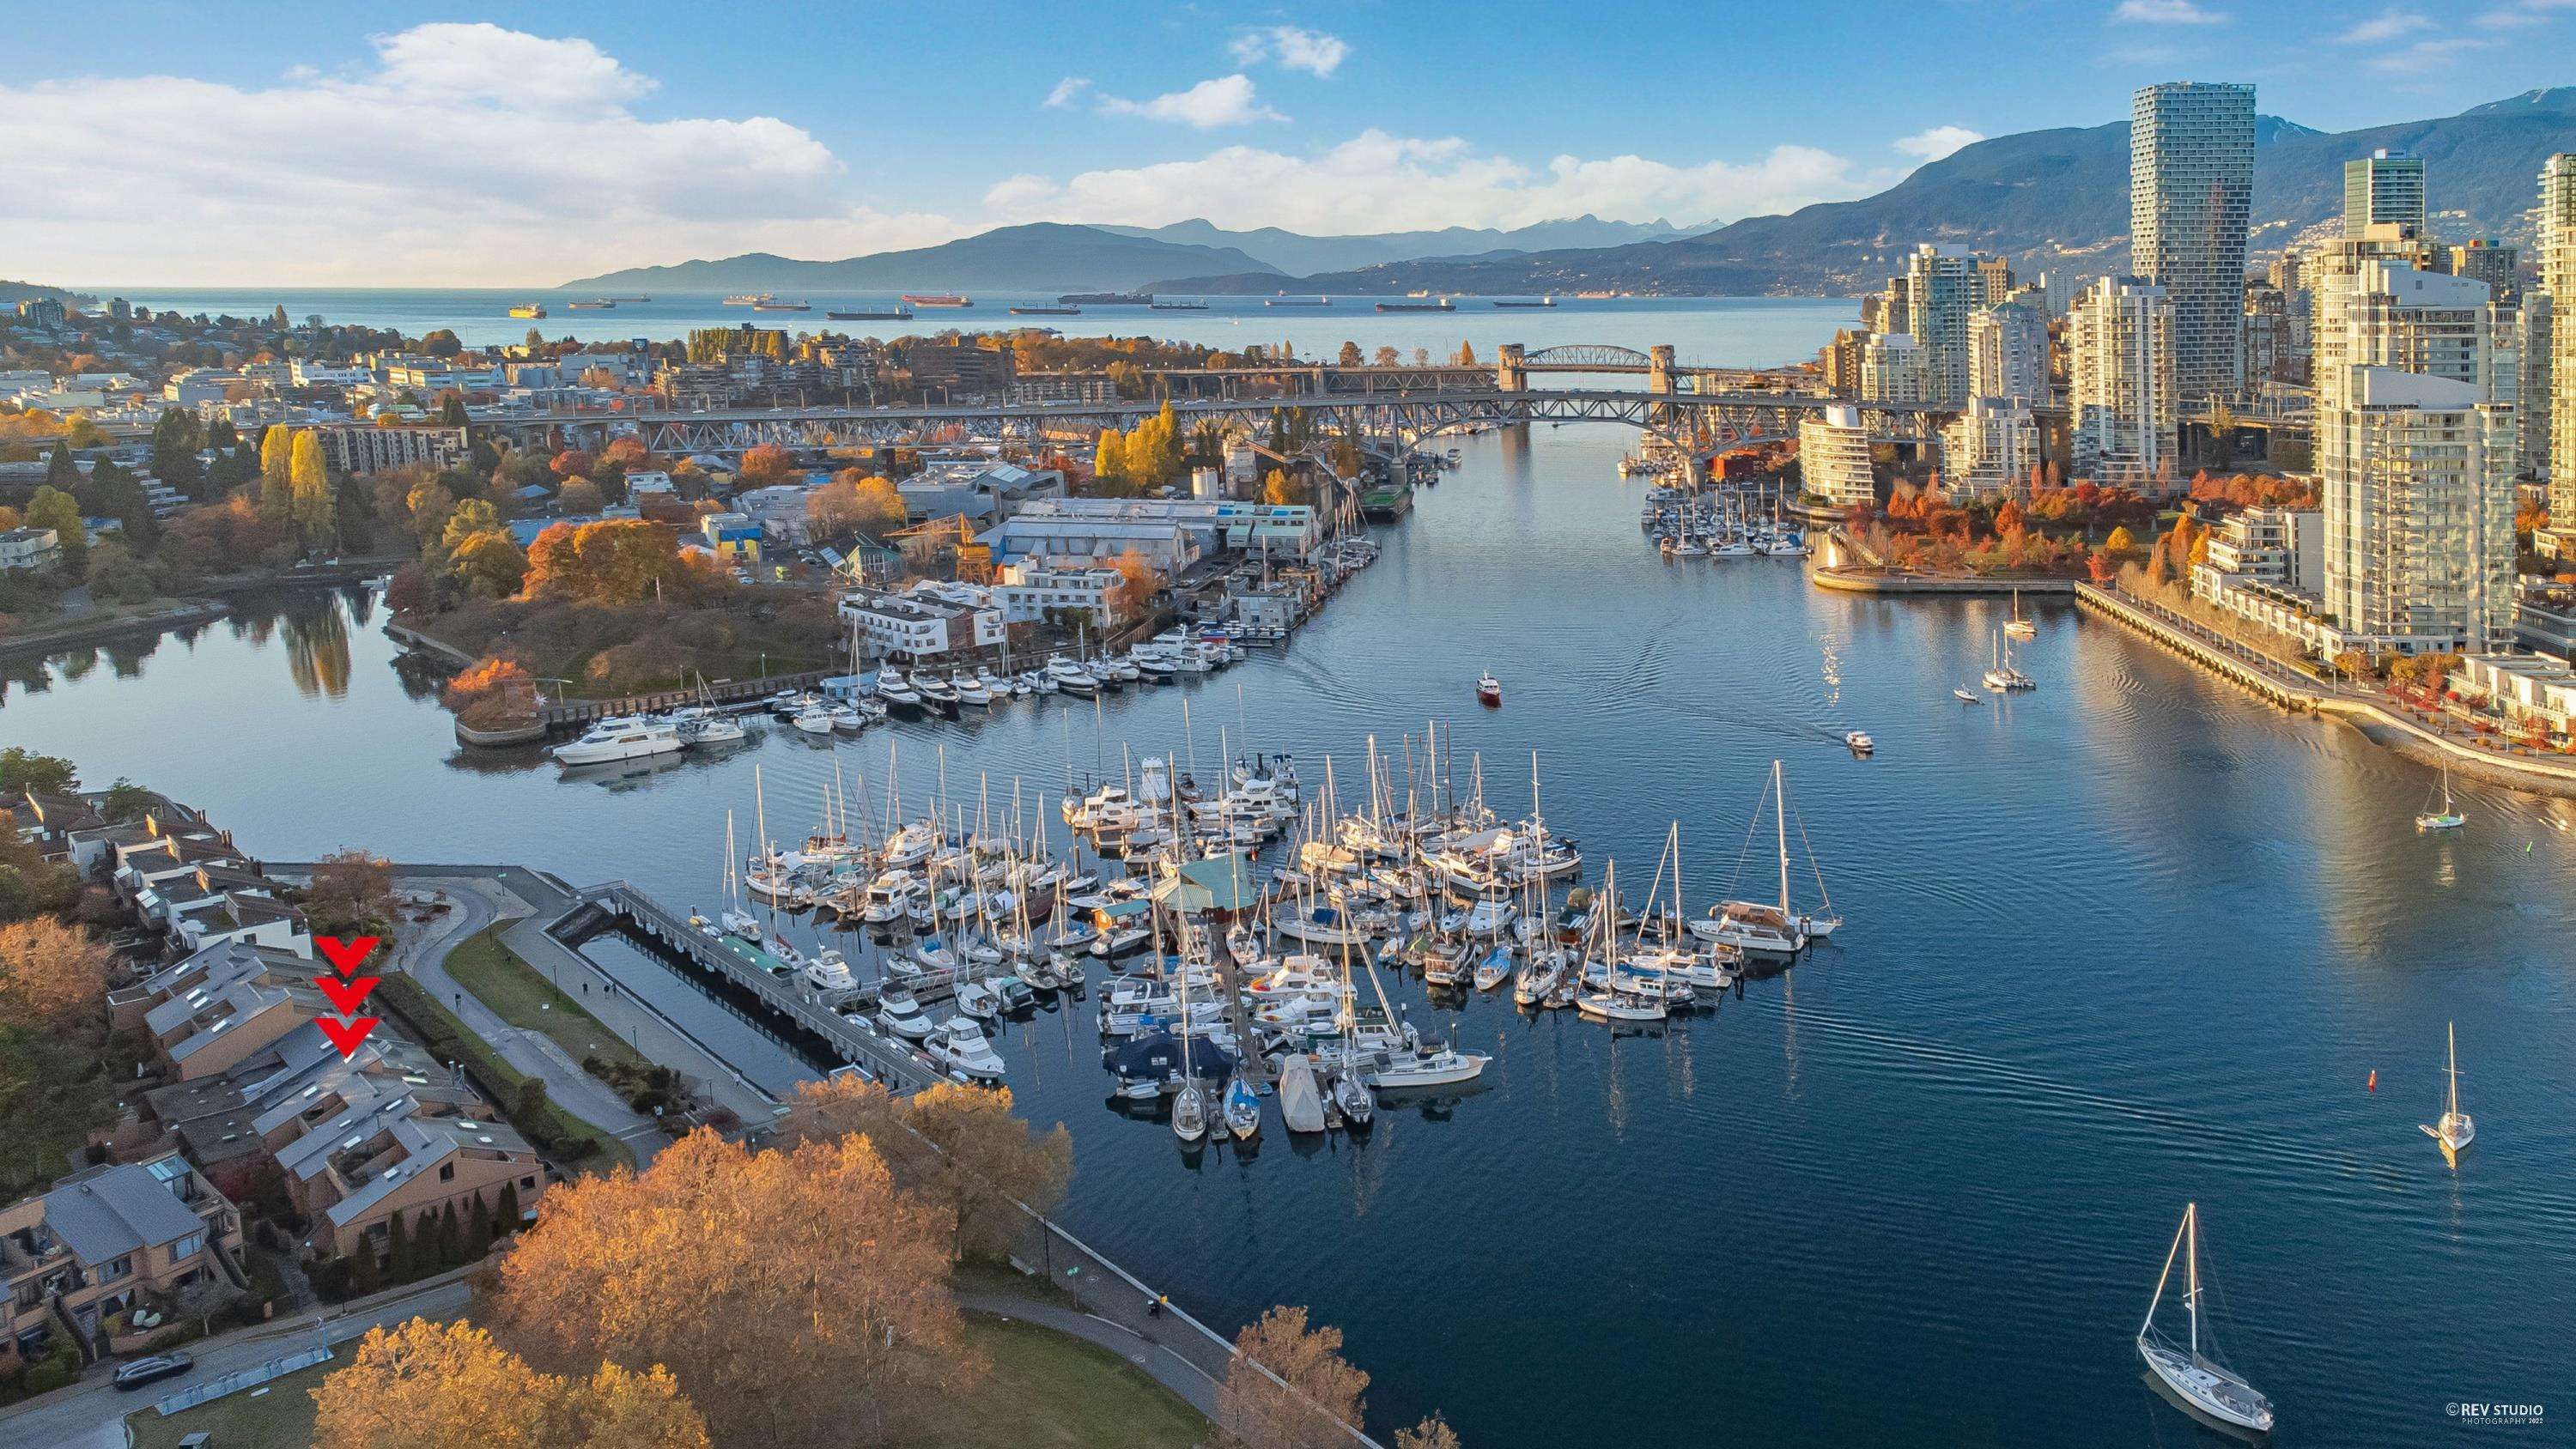 Open House. Open House on Saturday, November 12, 2022 1:30PM - 3:00PM
WATERFRONT TOWNHOUSE w/stunning water, marina, cityscape and mtn views. 180 degree views W out to English Bay sunsets and E to the Cambie St. Bridge sunrises. Renovated by Colbrone Arch